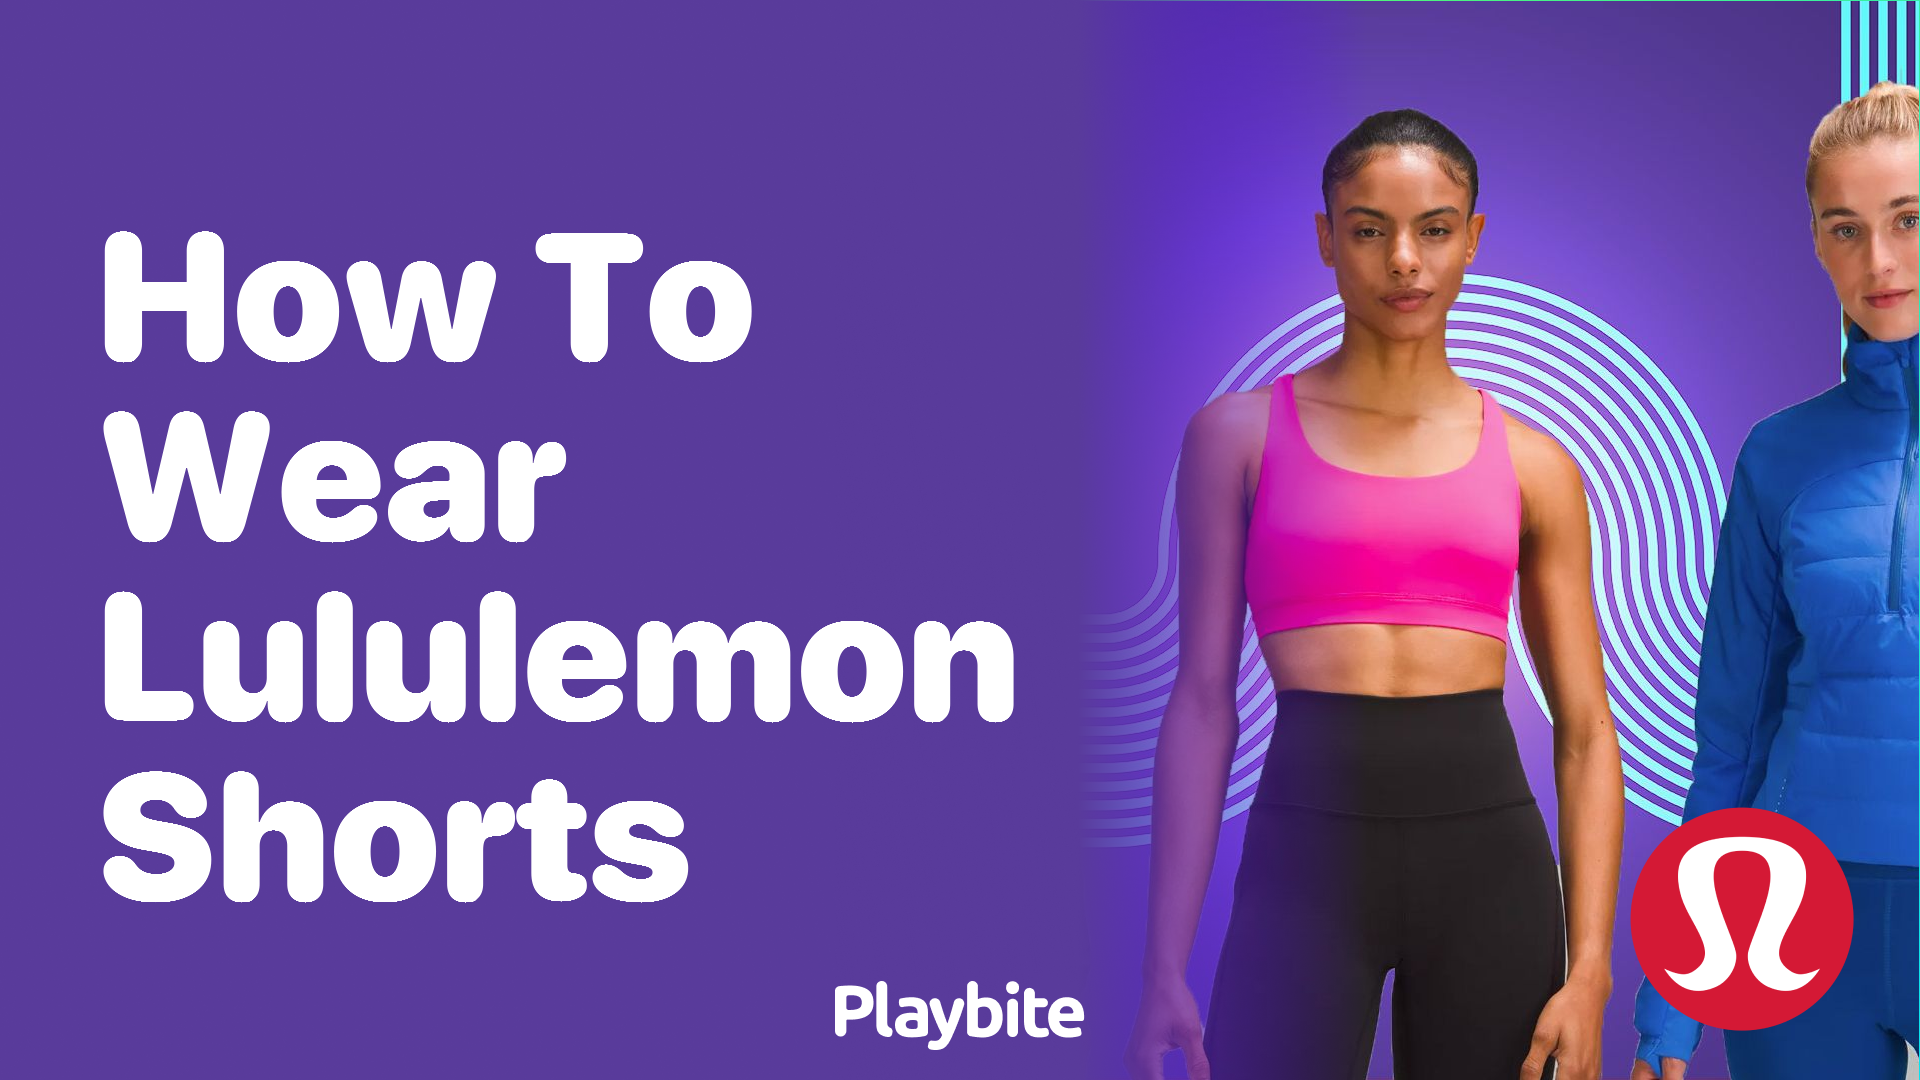 How to Wear Lululemon Shorts for Any Activity - Playbite